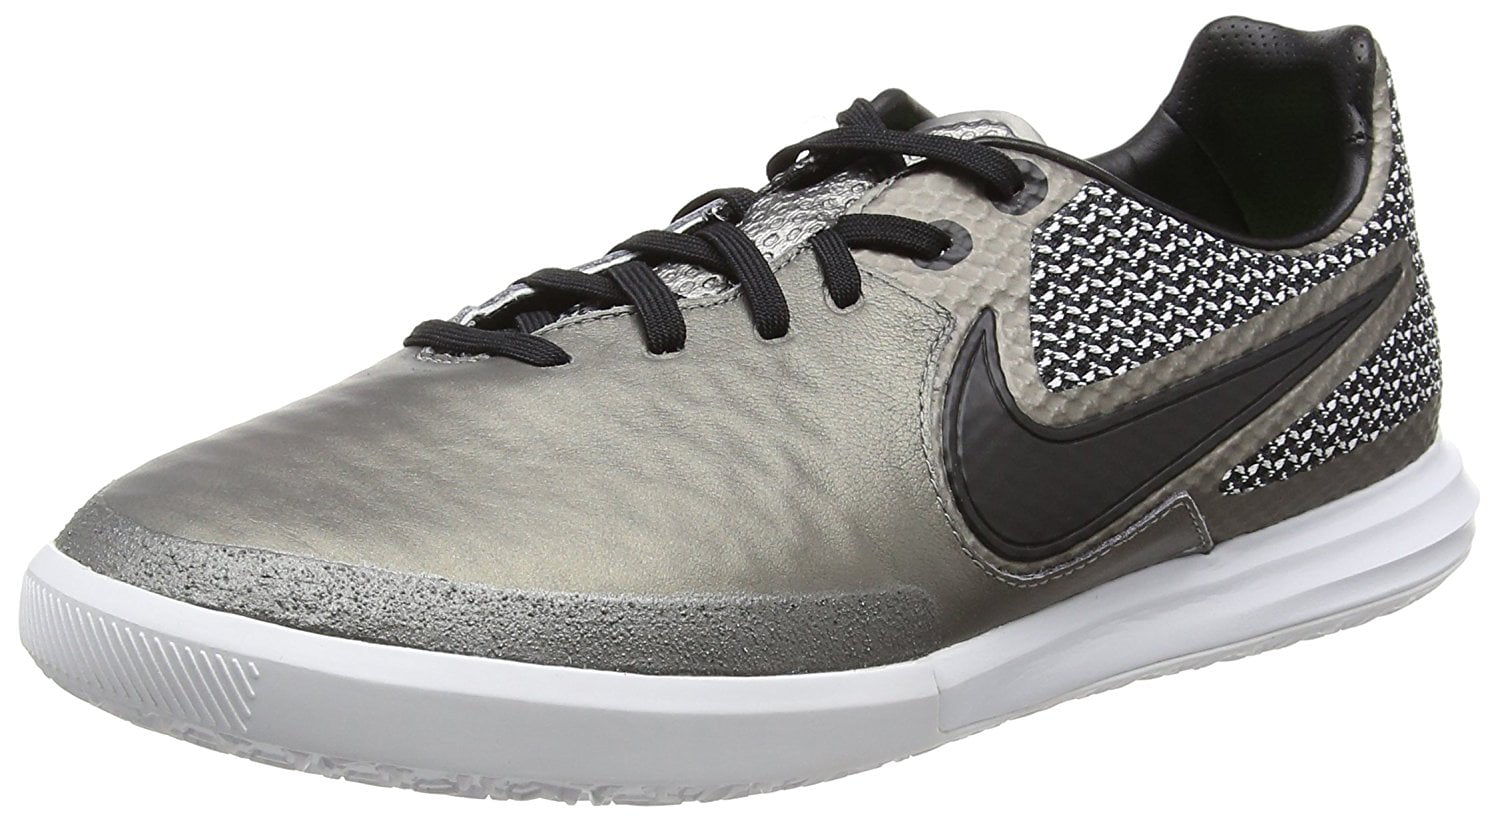 Nike Men's Magistax Final IC Indoor Soccer Shoes Pewter/Black/White ...